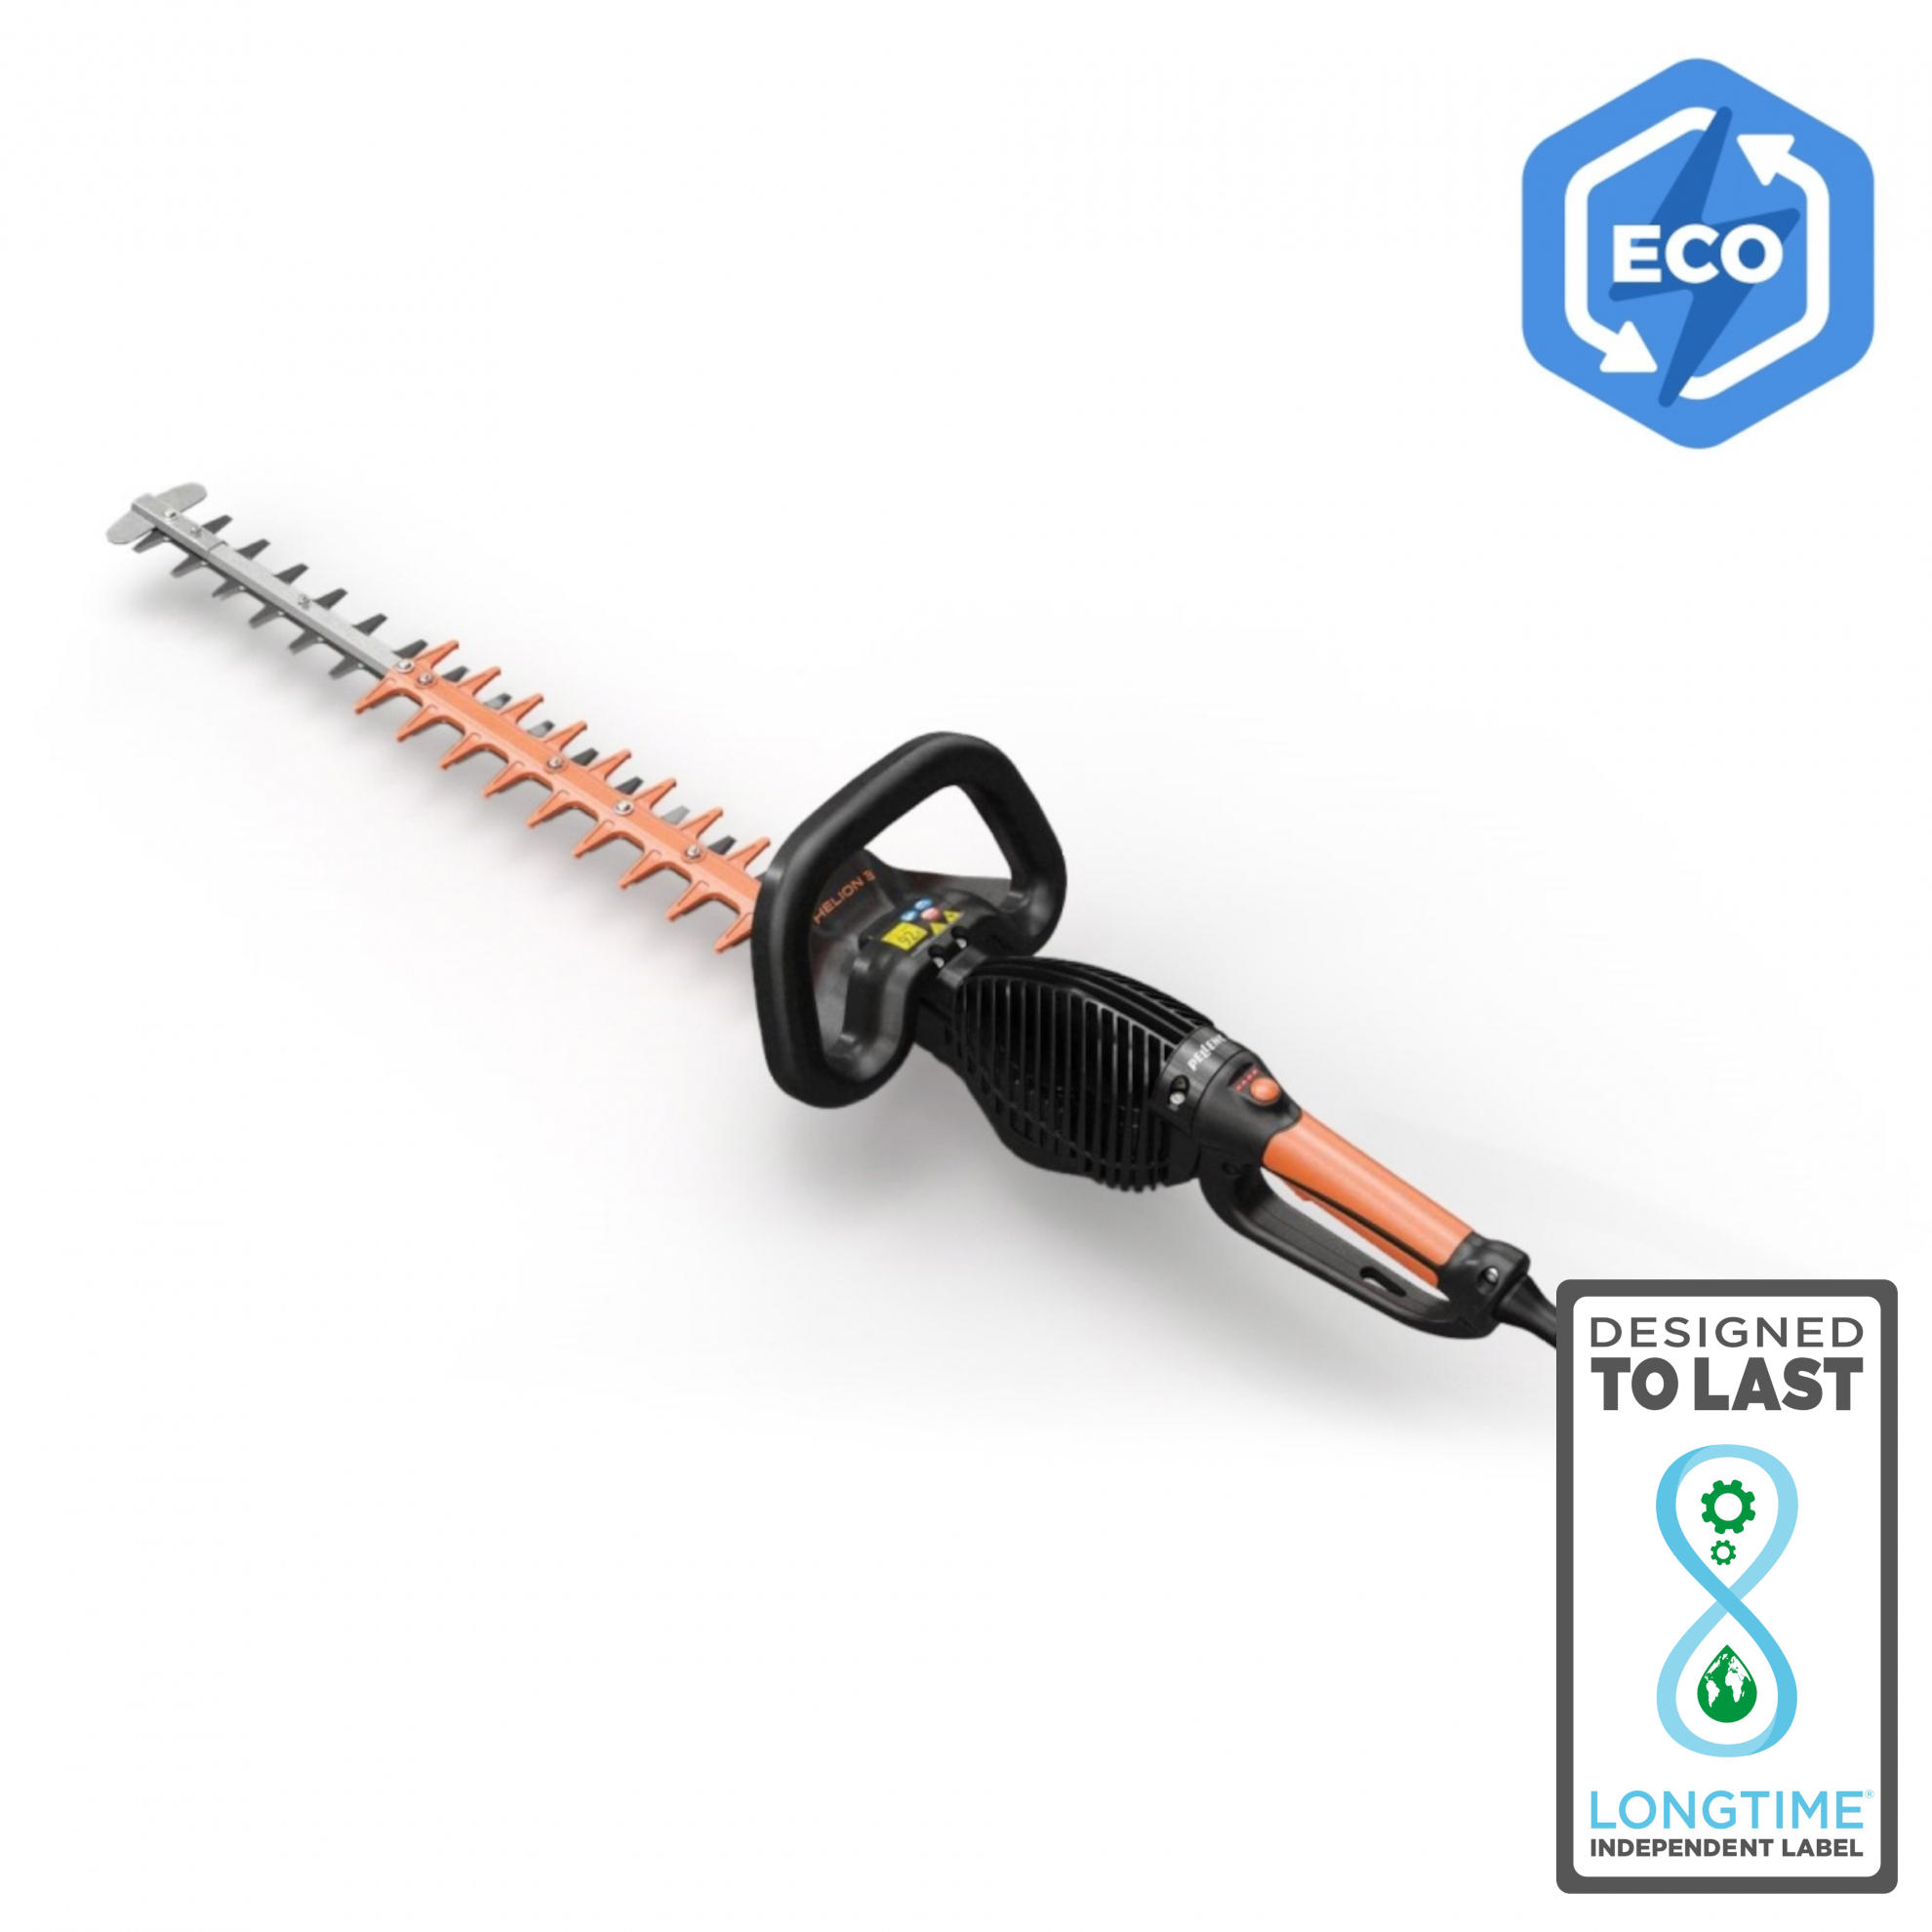 Pellenc Helion 3 Battery-Powered Hedge Trimmer